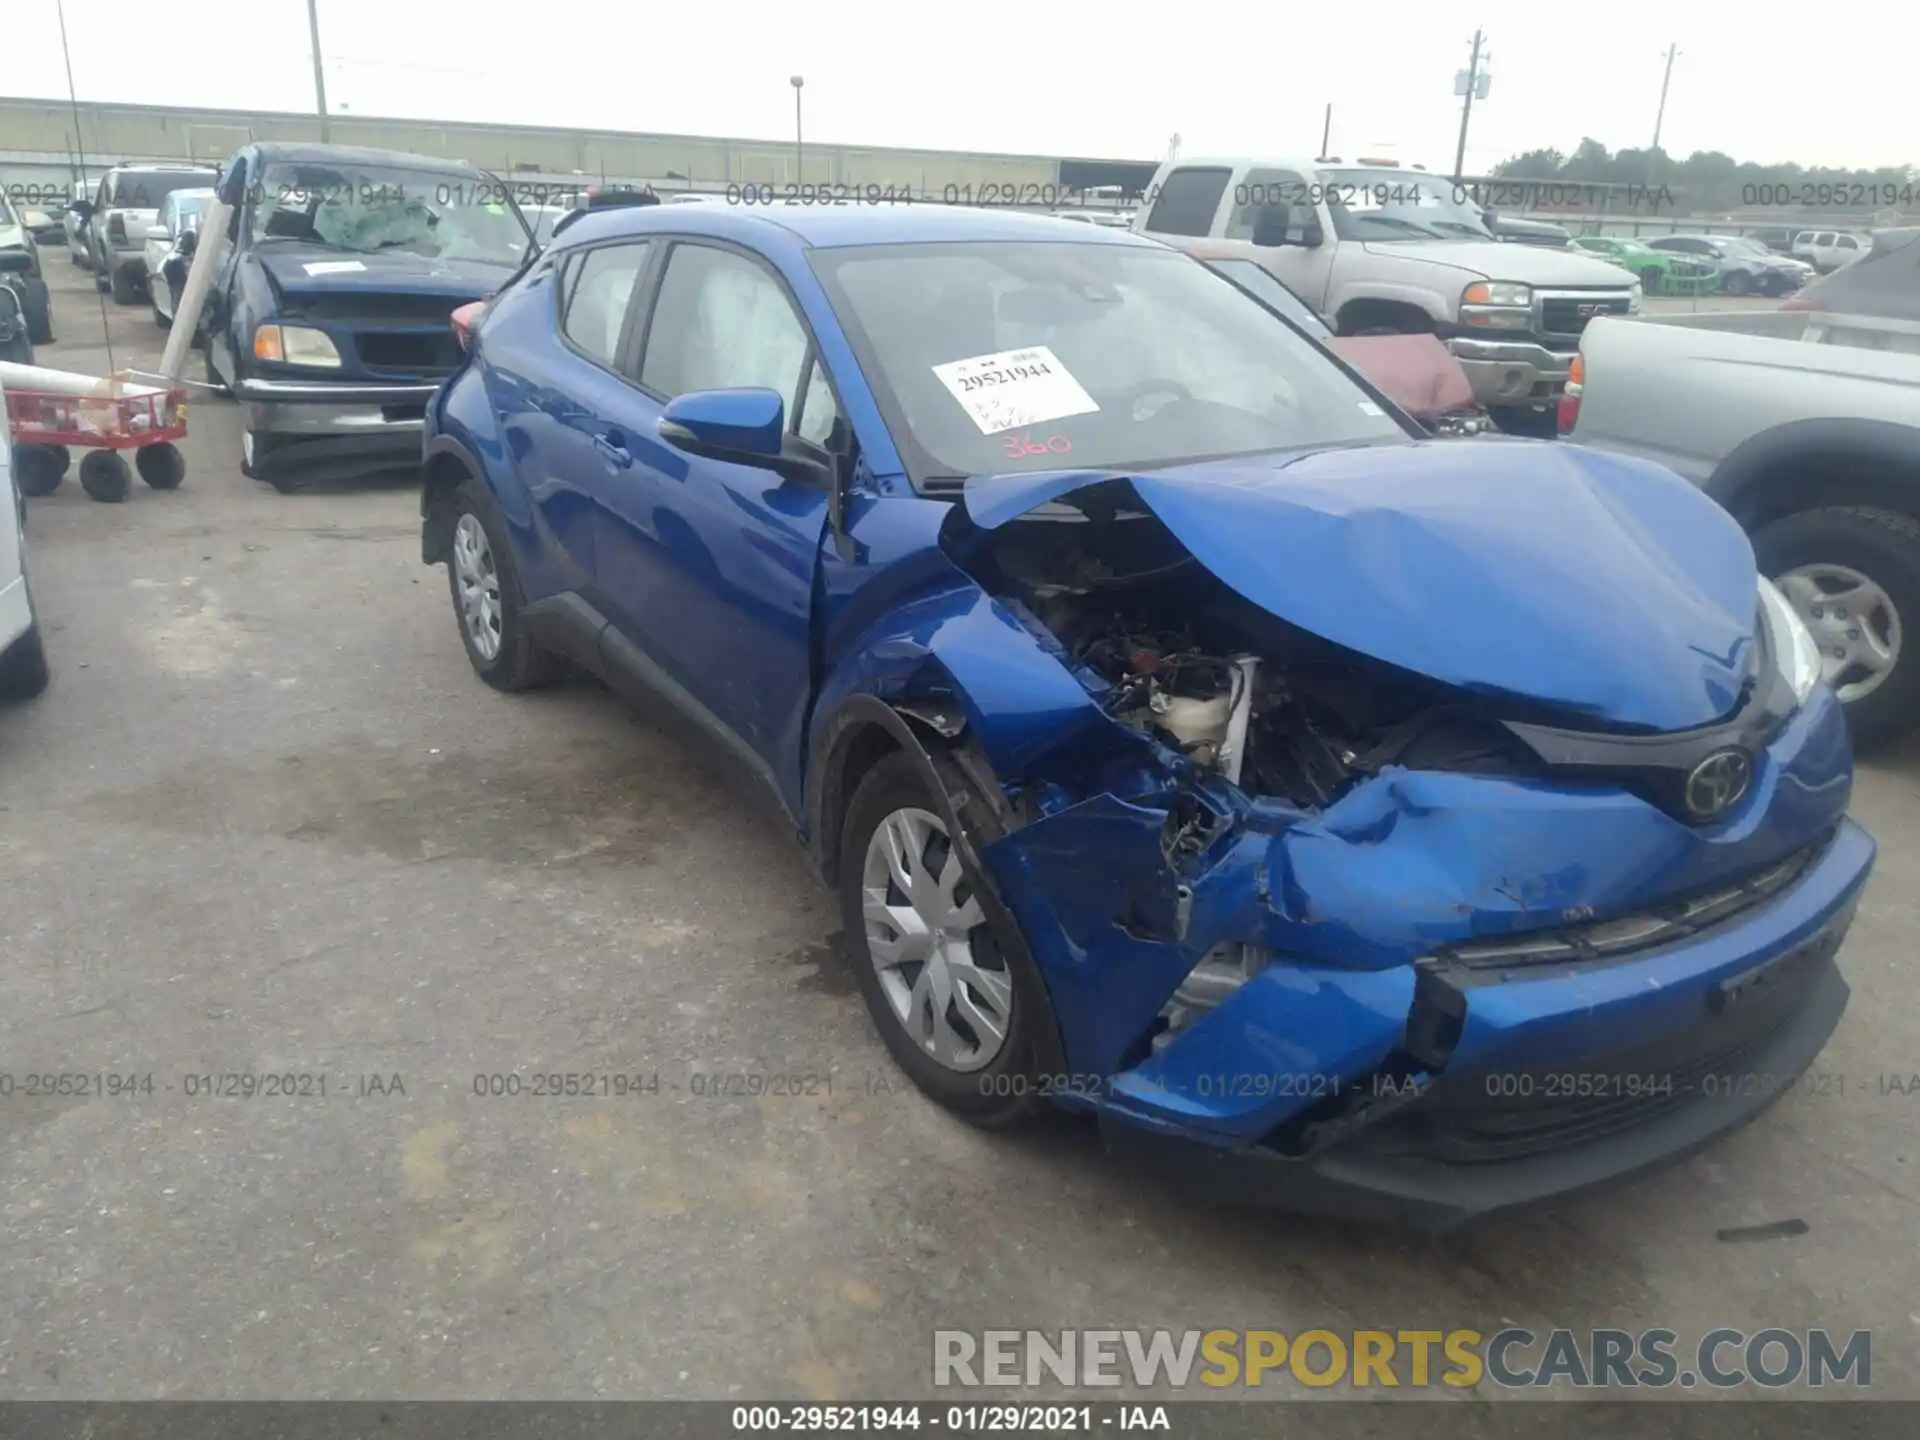 1 Photograph of a damaged car NMTKHMBXXKR081834 TOYOTA C-HR 2019